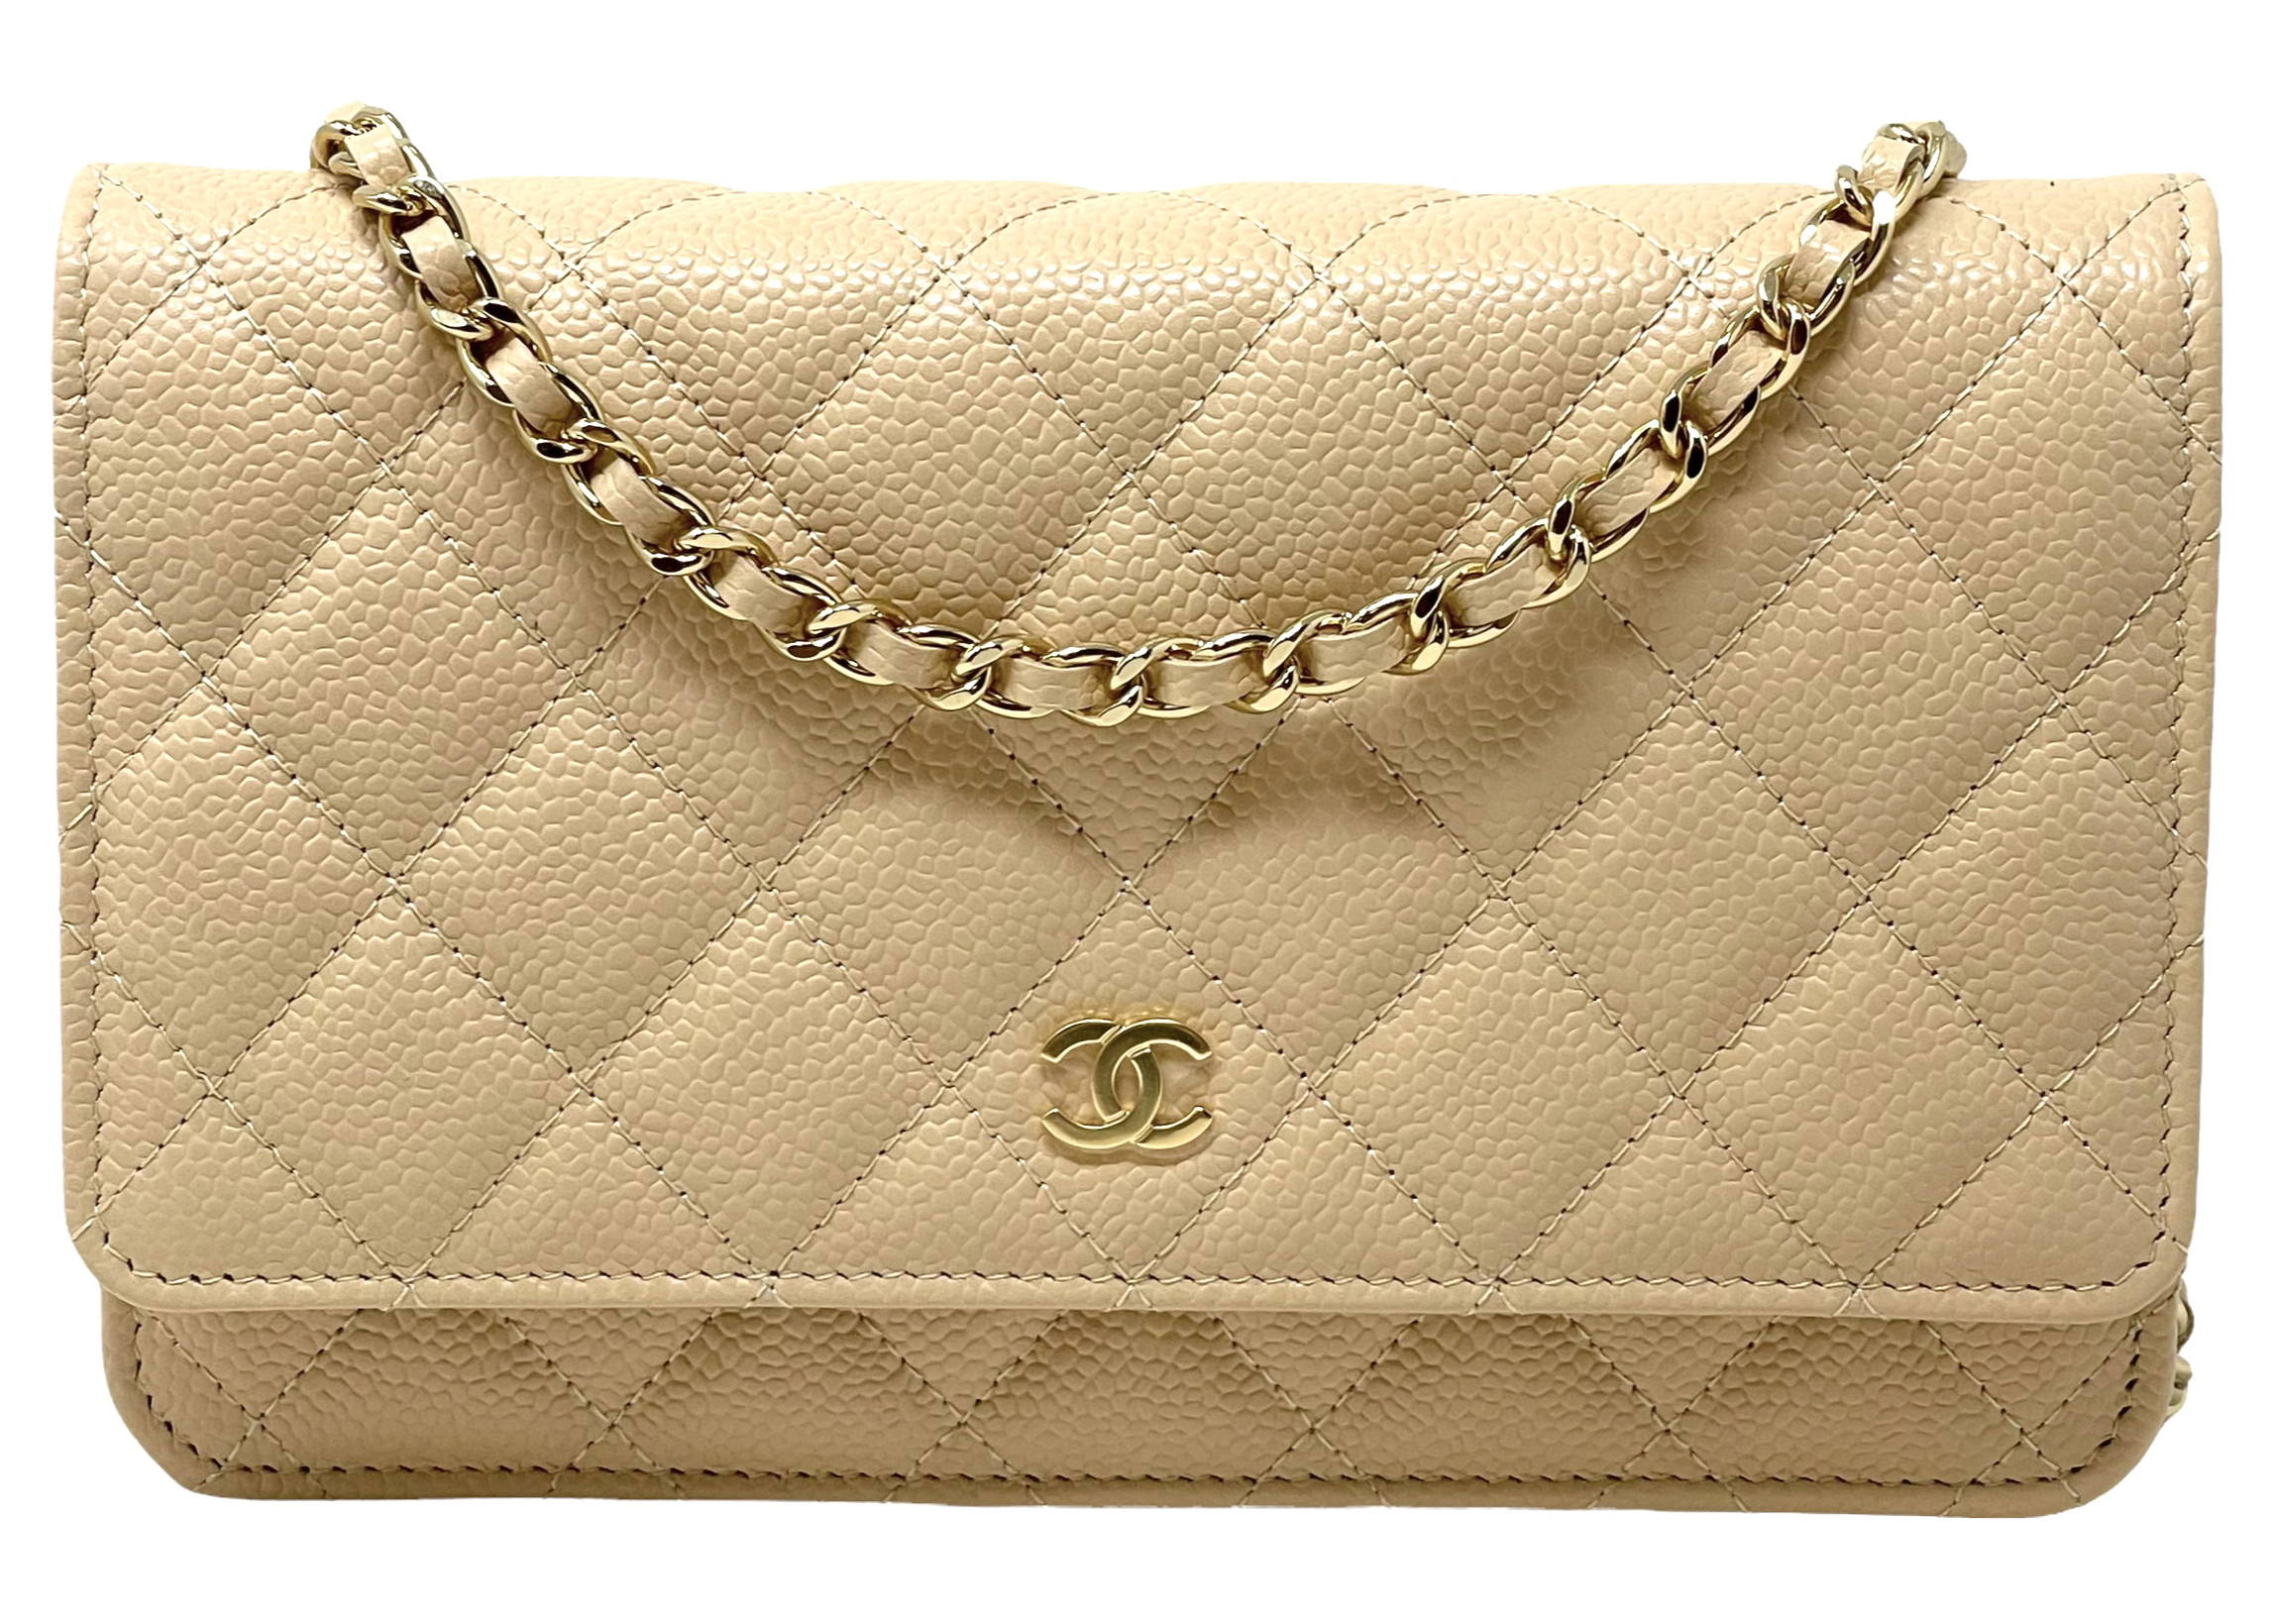 CHANEL Quilted Petite CC Caviar Timeless Tote in Beige 2000  2002  COCOON